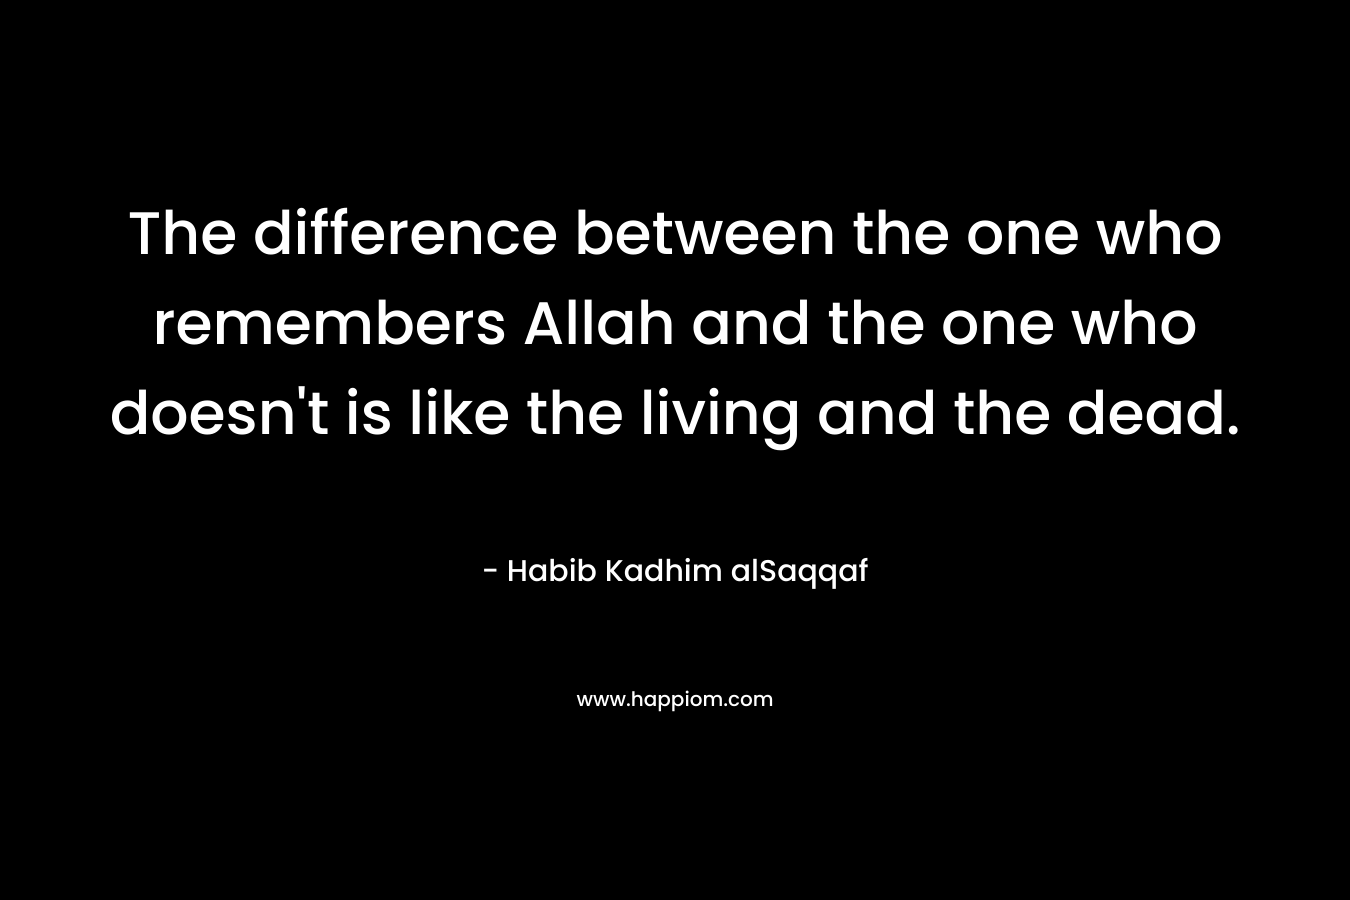 The difference between the one who remembers Allah and the one who doesn't is like the living and the dead.